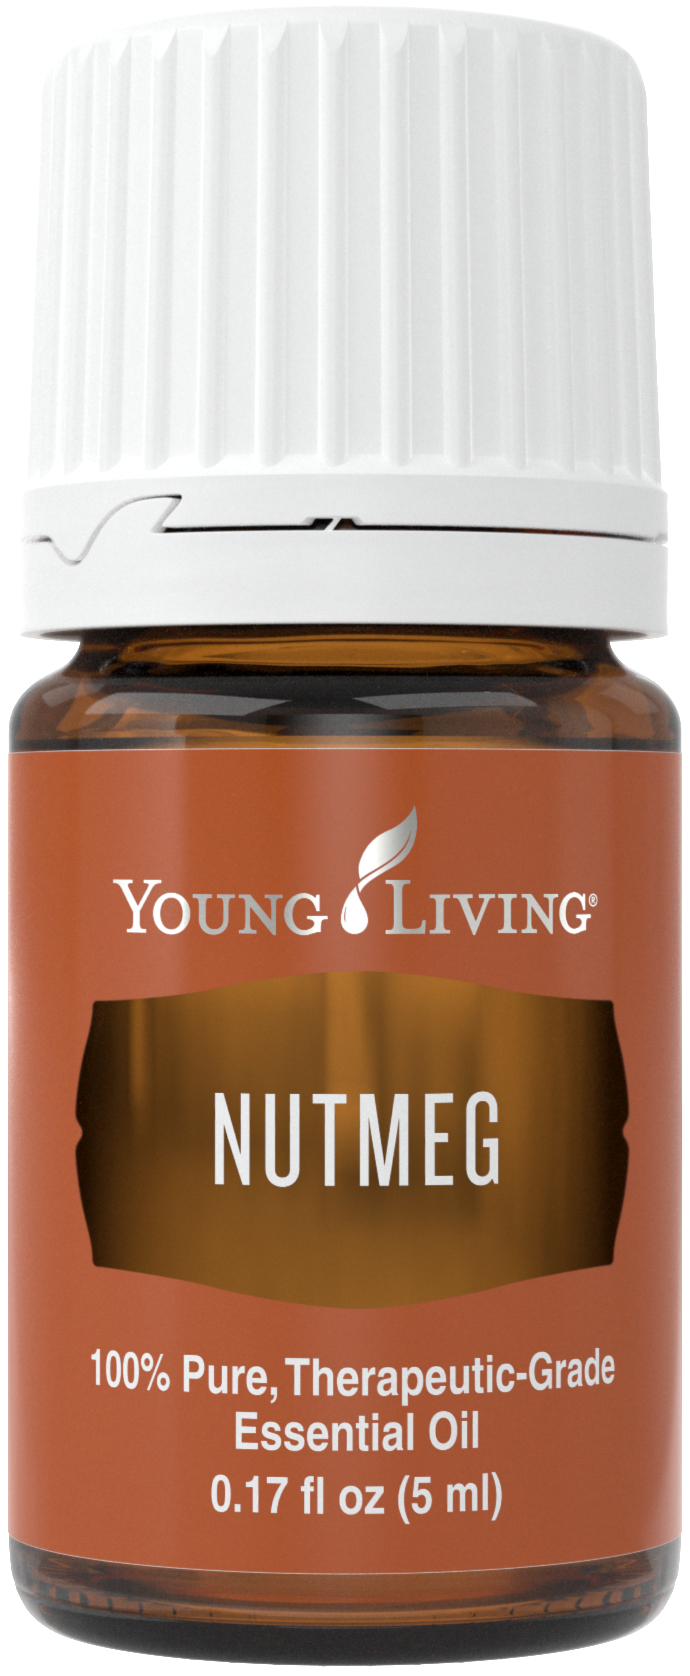 Manfaat nutmeg young living Aceite Esencial